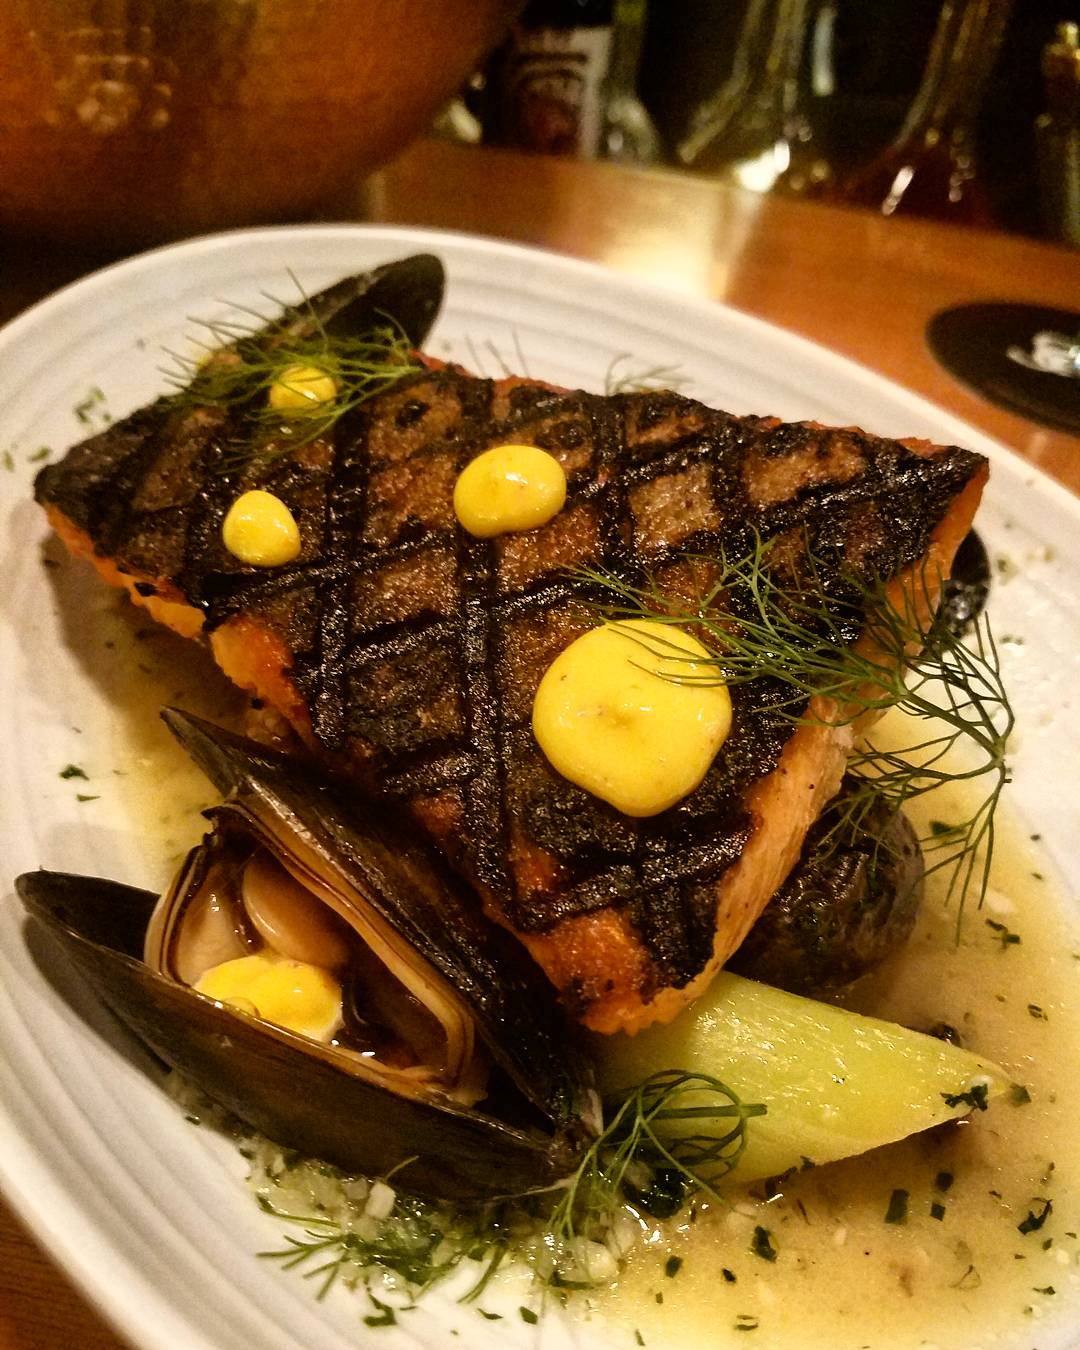 Seared Trout with Mussel, tarragon sauce and dill